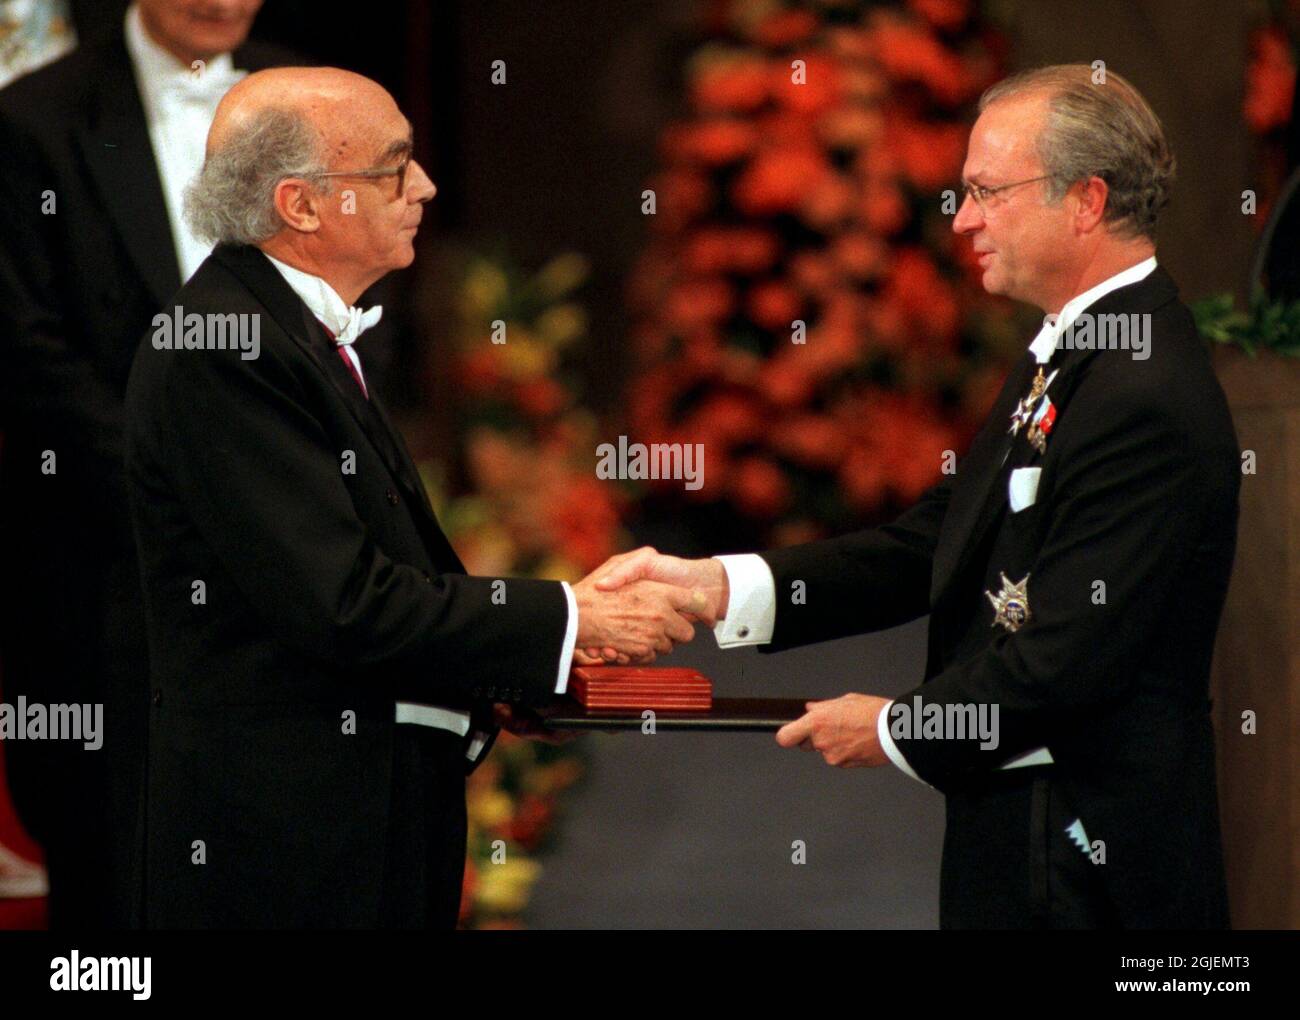 Nobel Prize winner in literature, Jose Saramago receiving the prize from  king Carl XVI Gustaf of Sweden at the Nobel Prize ceremony in the concert  hall in Stockholm Sweden Stock Photo -